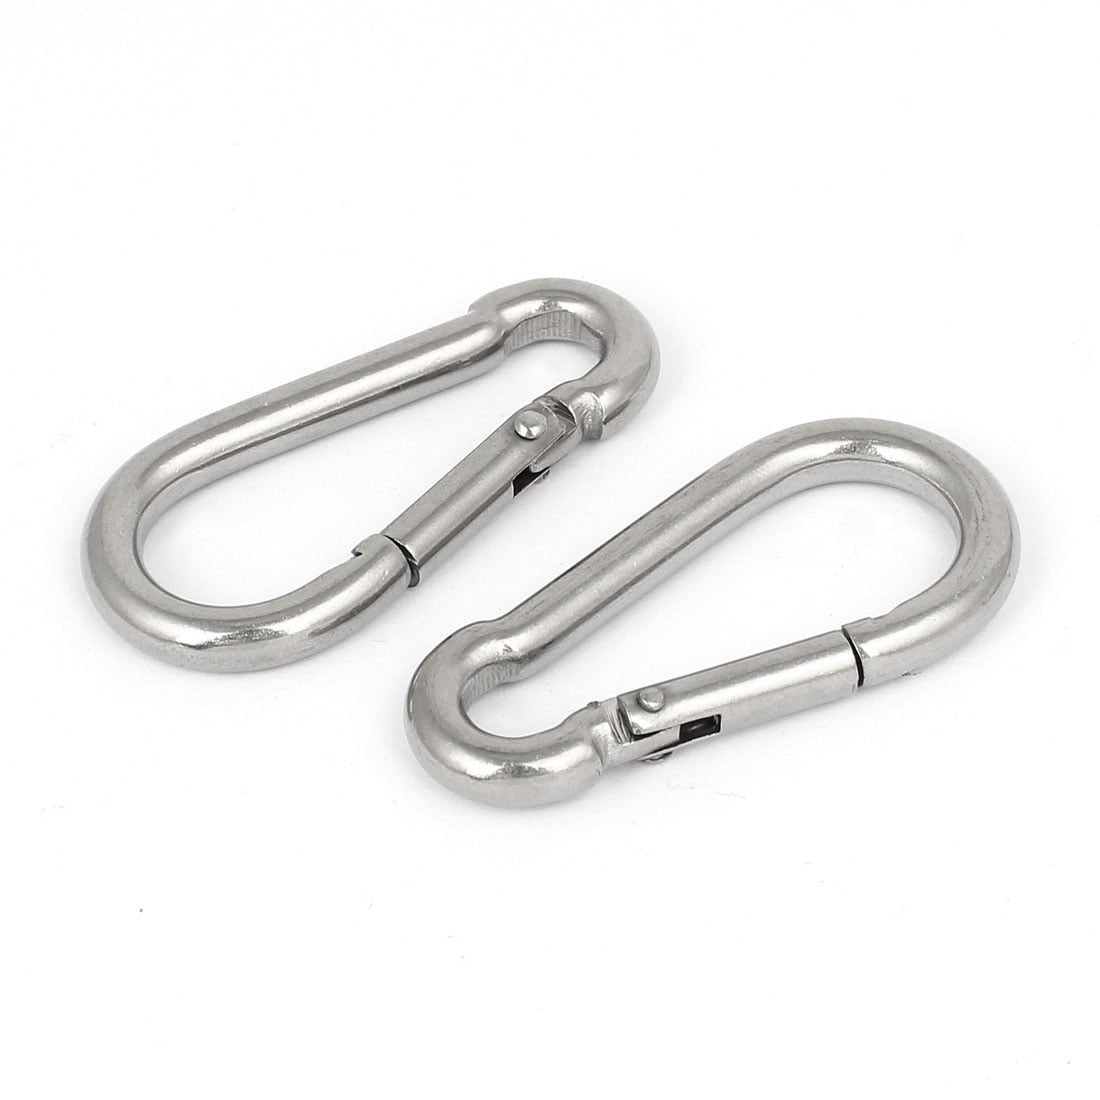 10 x 60x31mm 304 Stainless Steel Oval Quick Link Spring Lock M6 Carabiner 